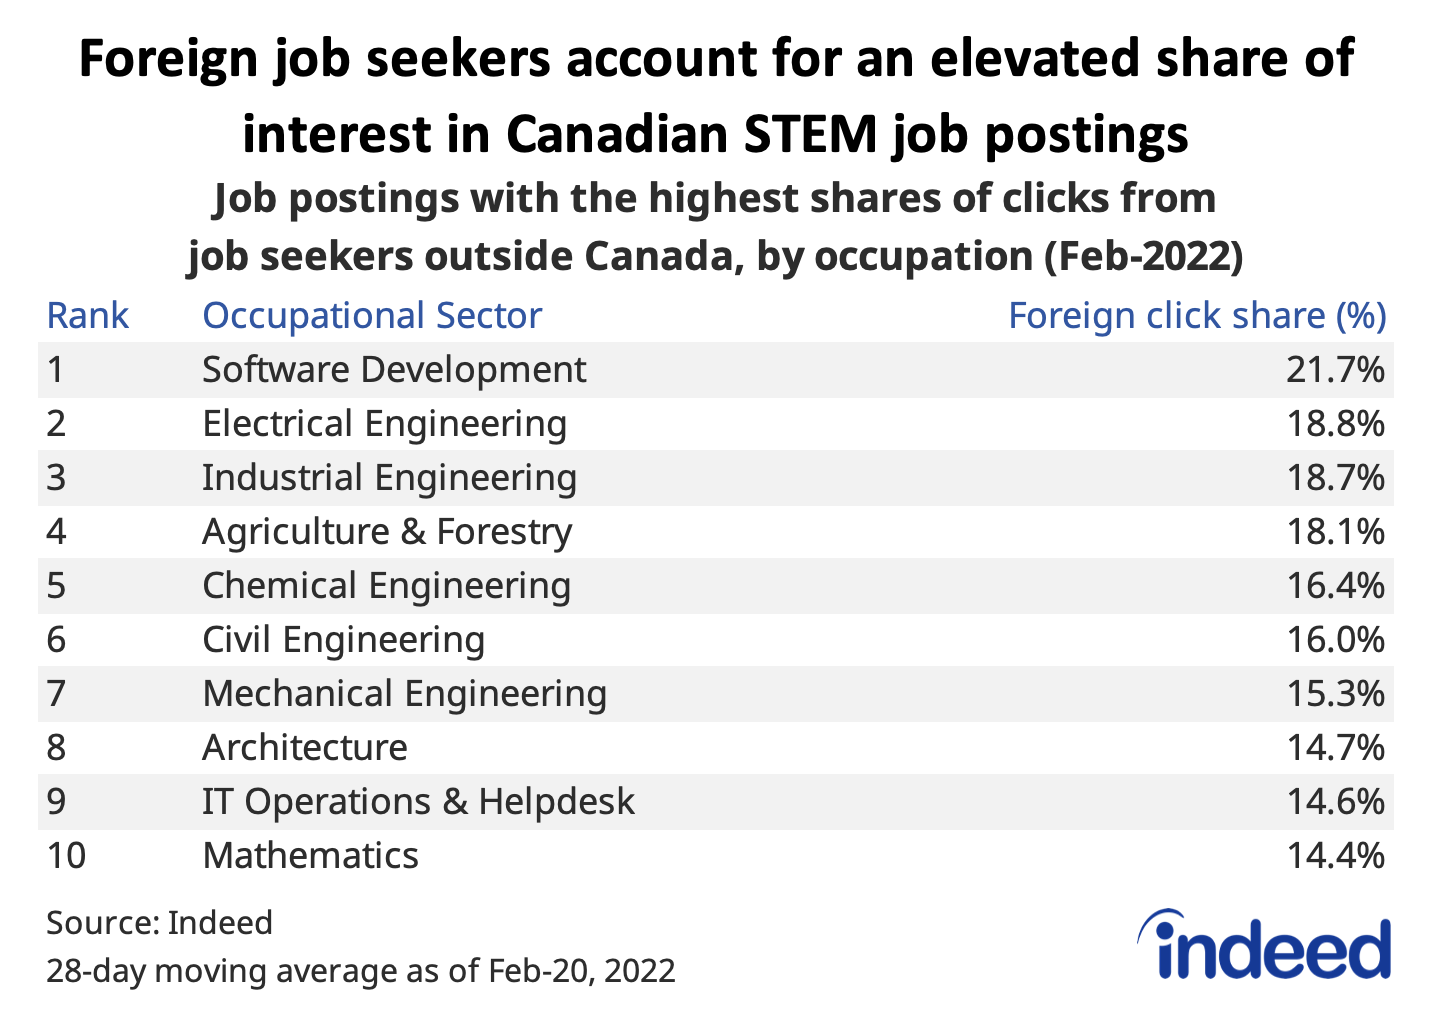 Table titled “Foreign job seekers account for an elevated share of interest in Canadian STEM job postings.”